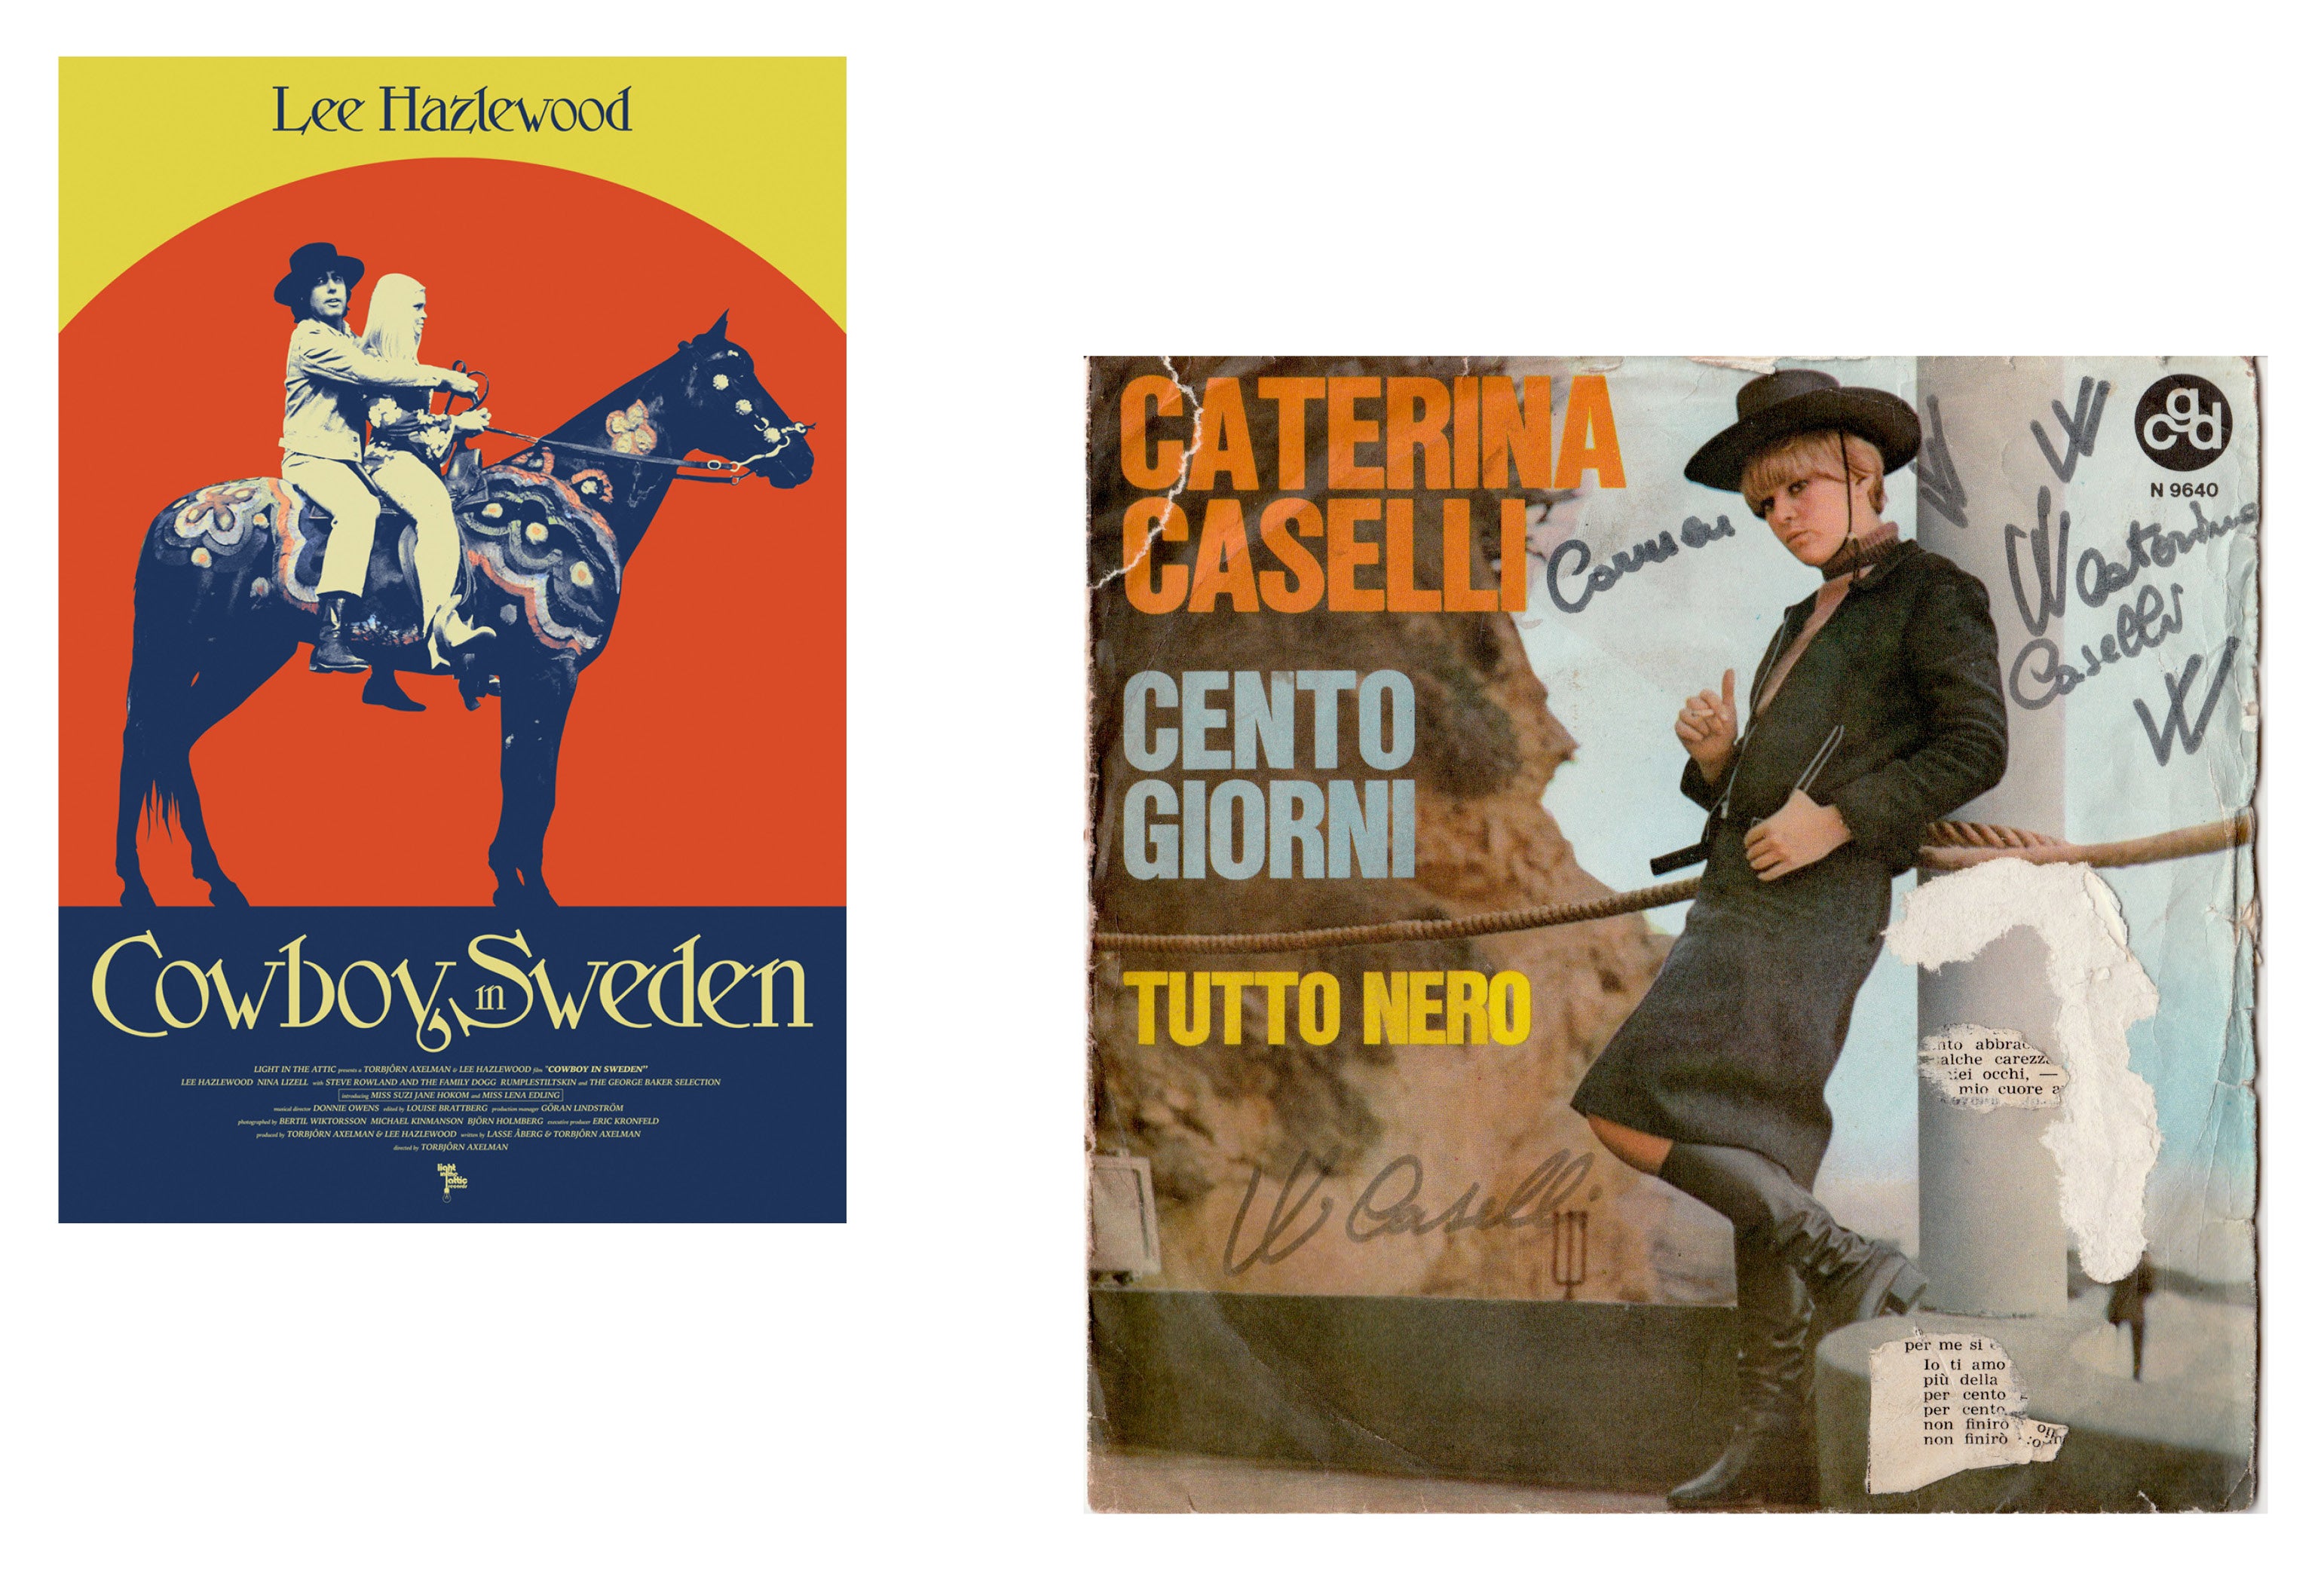 By the end of the 1960s cowboy fashion and culture had spread all across Europe, from Italy to Sweden.